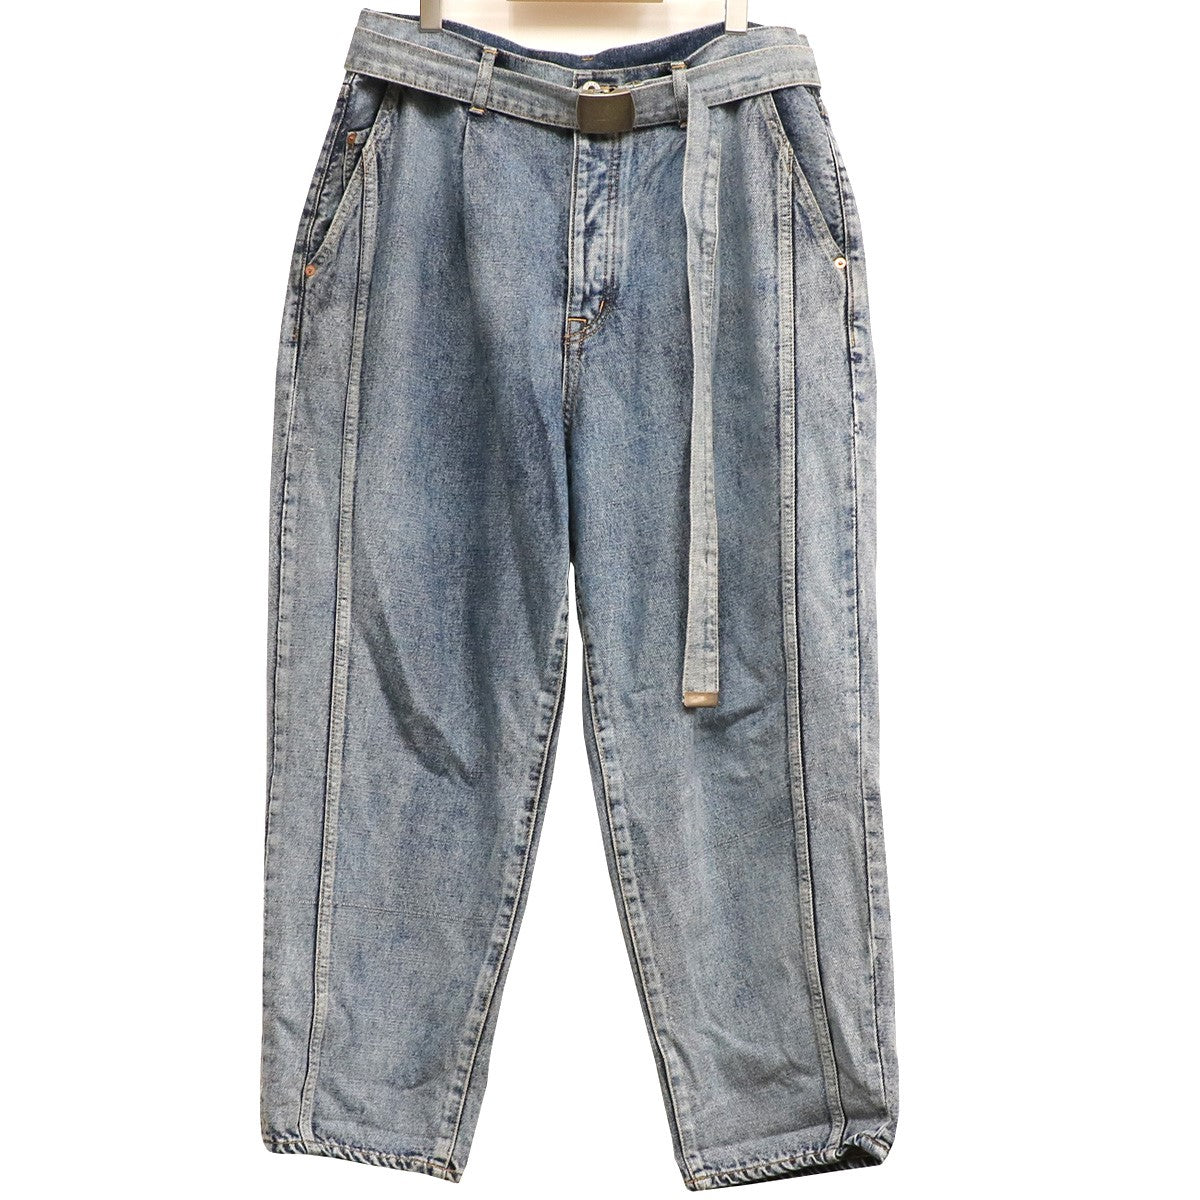 doublet(ダブレット) 19SS SILK DENIM WIDE TAPERED TROUSER シルク混 ...